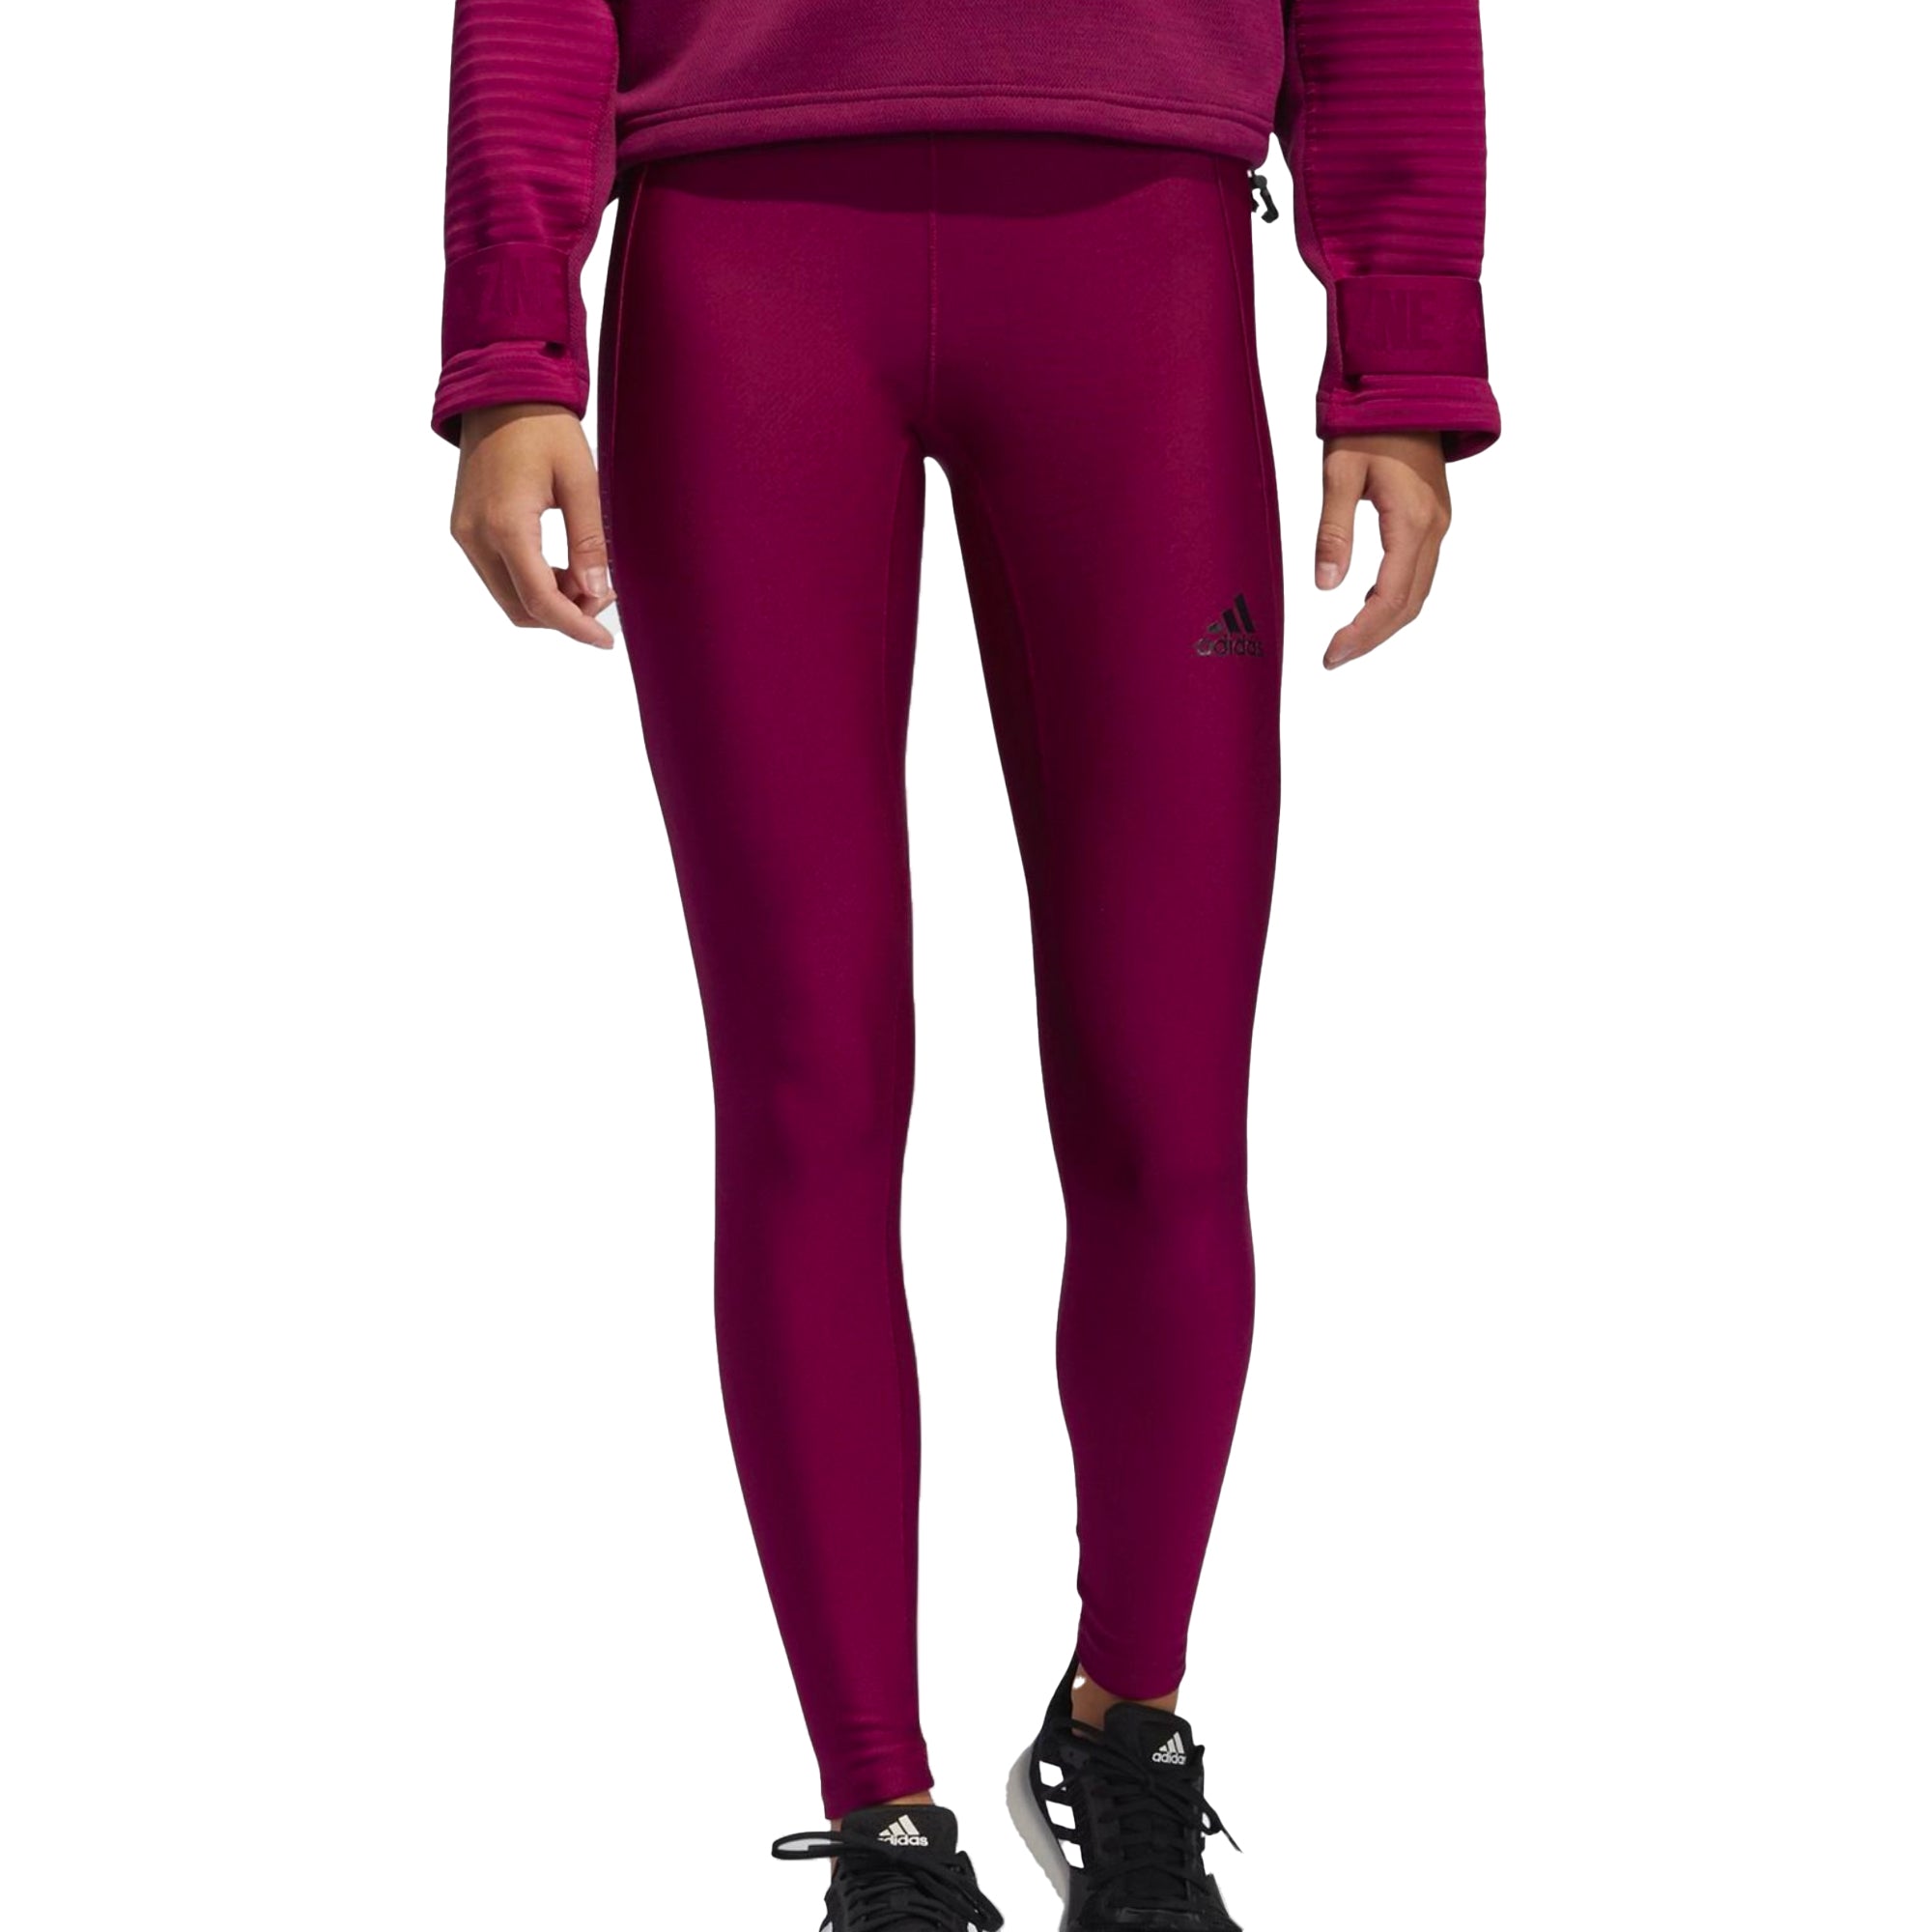 adidas Women's Alphaskin Cold.RDY Long Tights Power Berry - XS